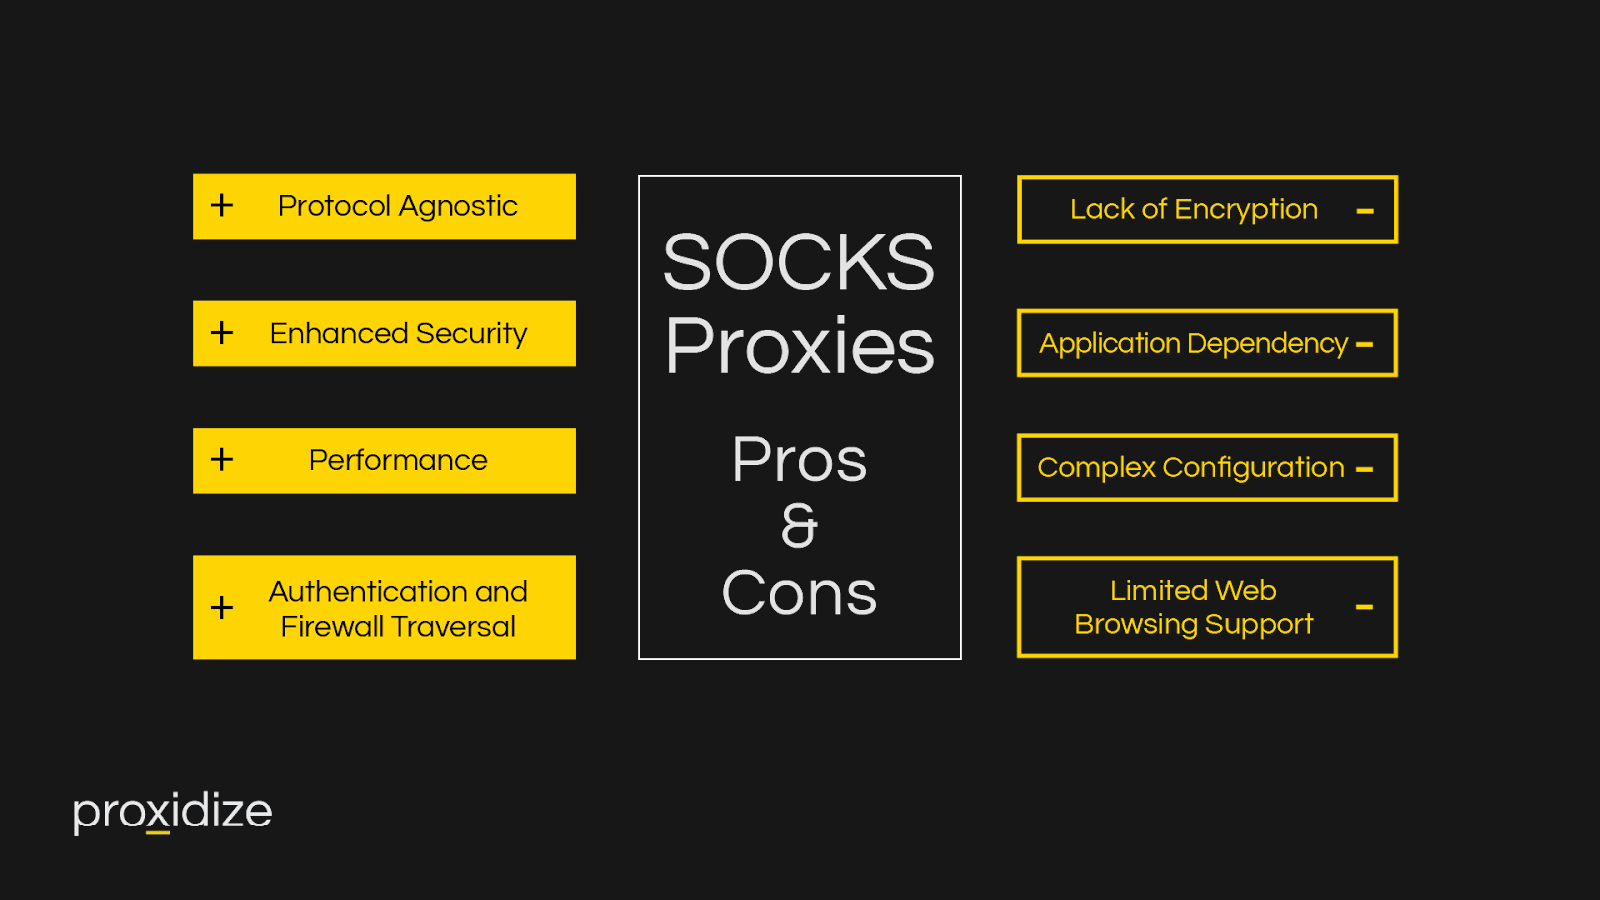 socks proxy pros and cons